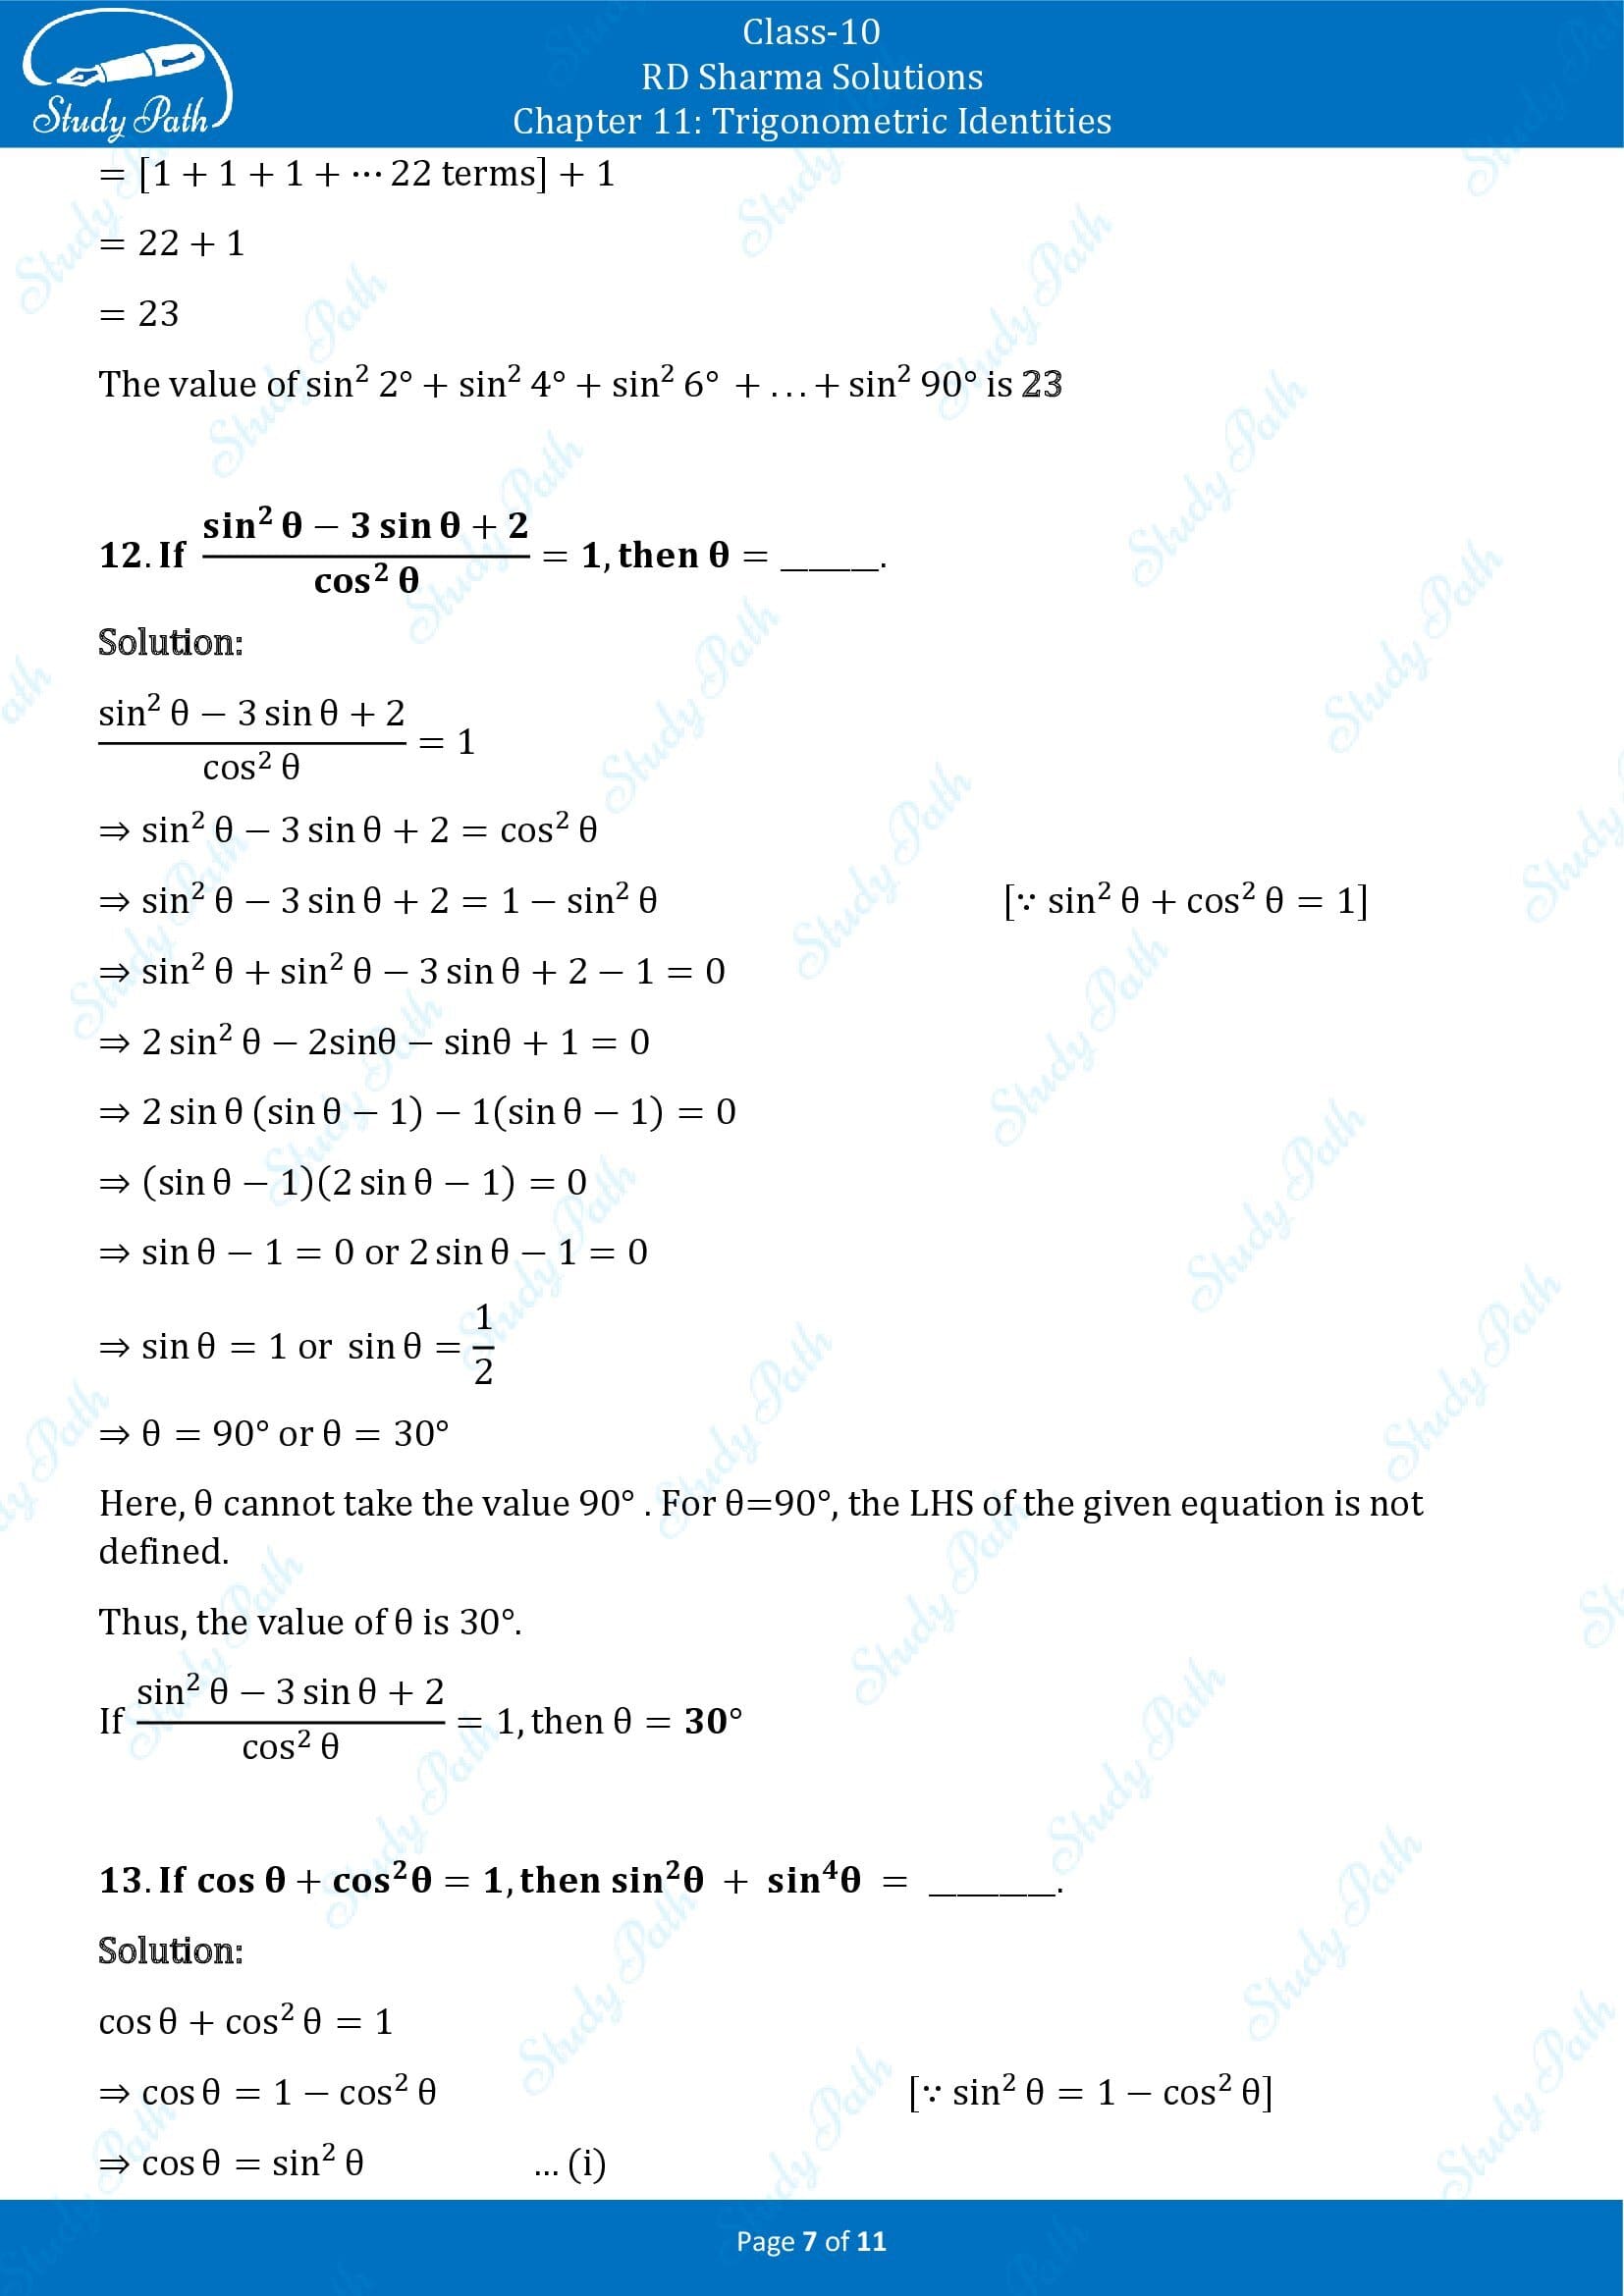 RD Sharma Solutions Class 10 Chapter 11 Trigonometric Identities Fill in the Blank Type Questions FBQs 00007